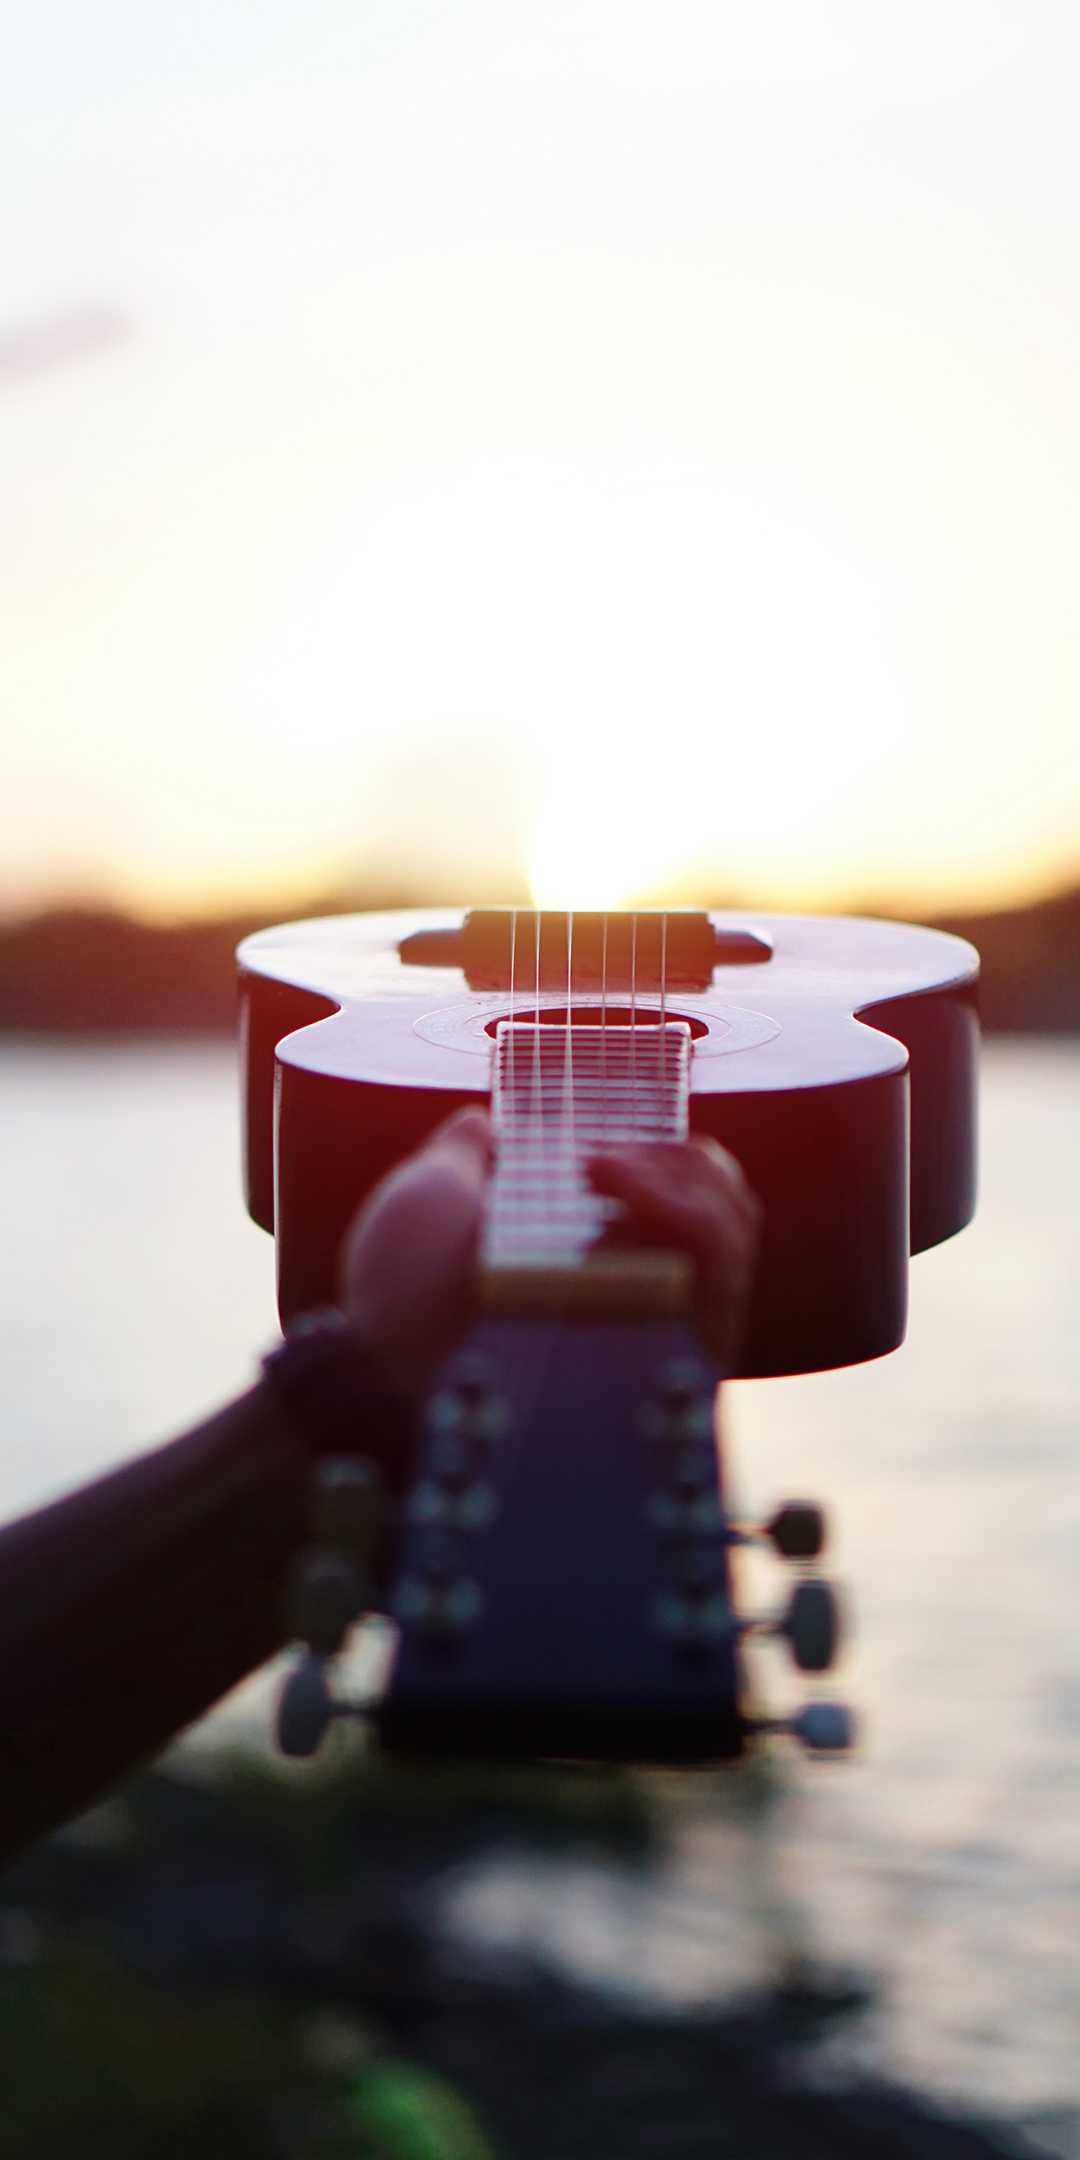 Guitar: A musical instrument with a flat-backed rounded body that narrows in the middle. 1080x2160 HD Background.